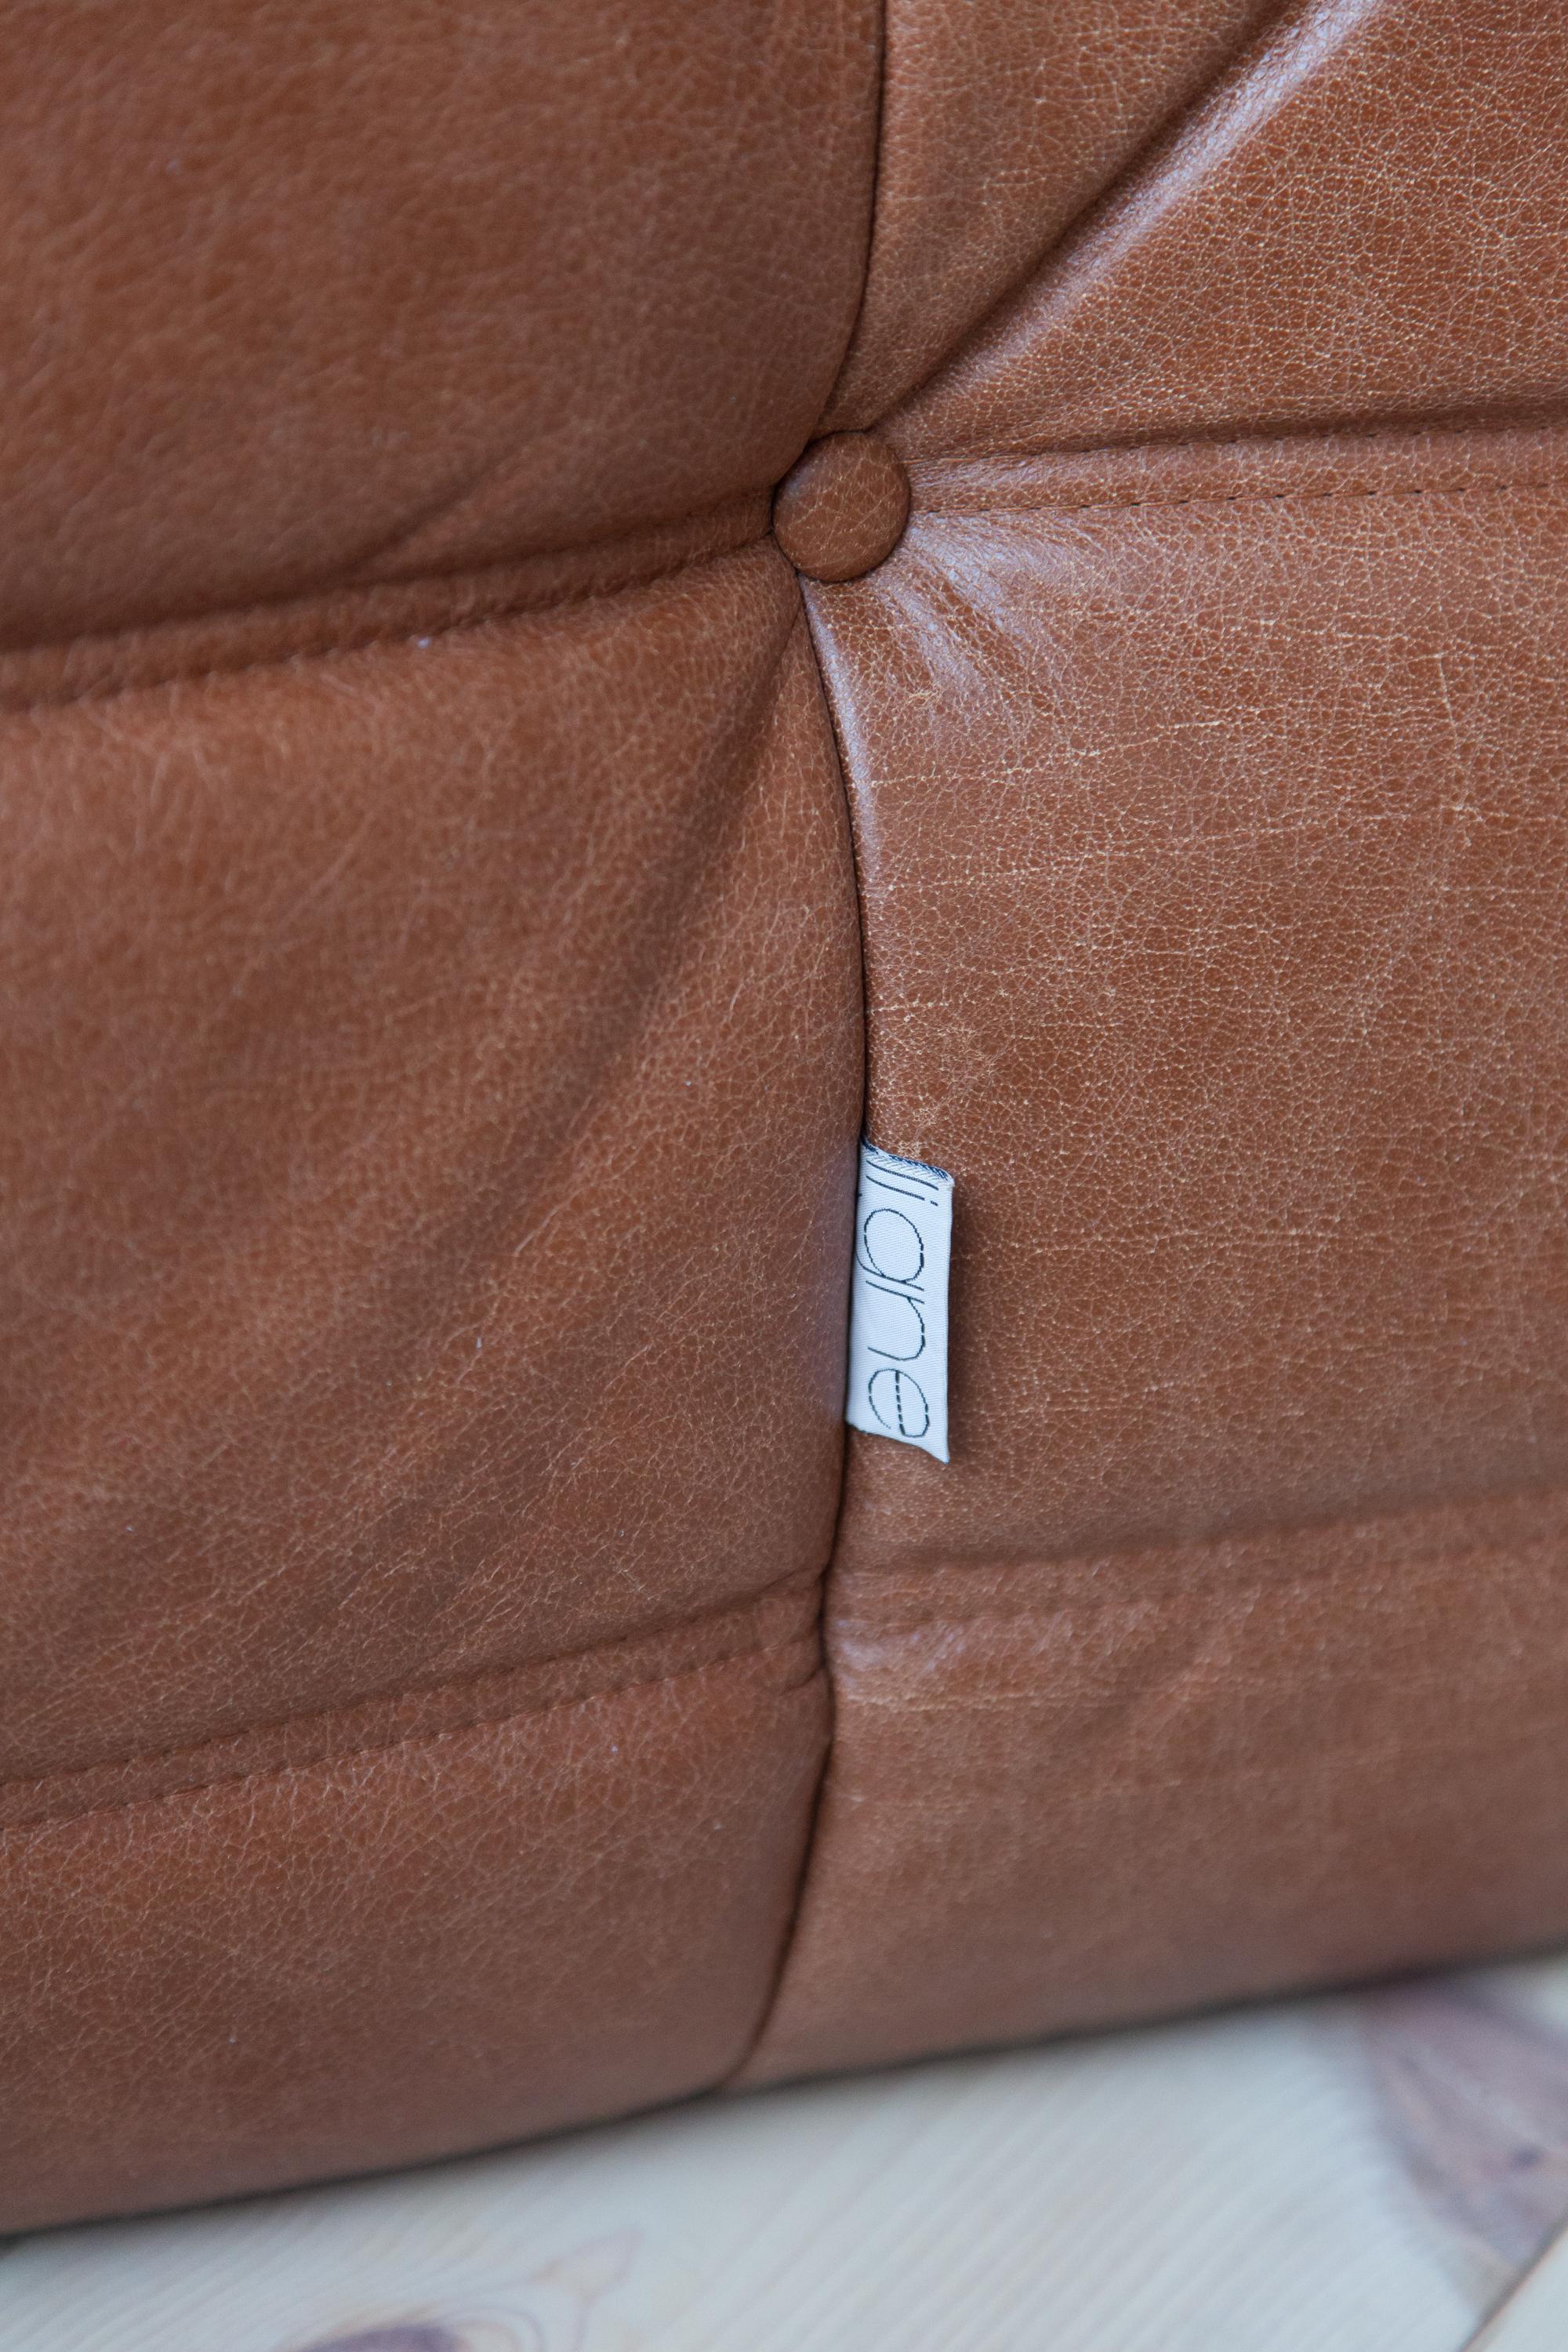 Togo Corner Couch in Kentucky Brown Leather by Michel Ducaroy by Ligne Roset For Sale 2